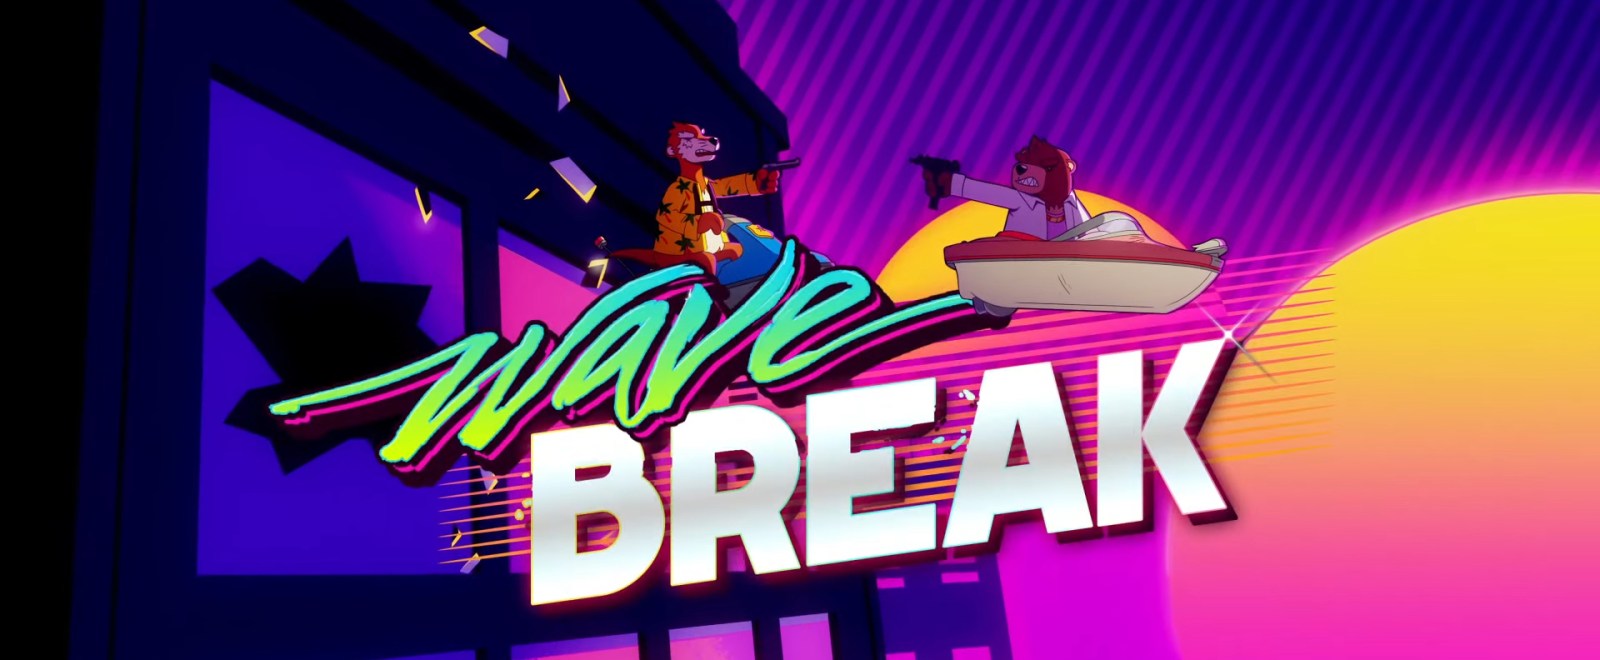 Wave Break Is The World S First Skateboating Game And It Looks Rad As Hell - daniel newhard youtube roblox hacks